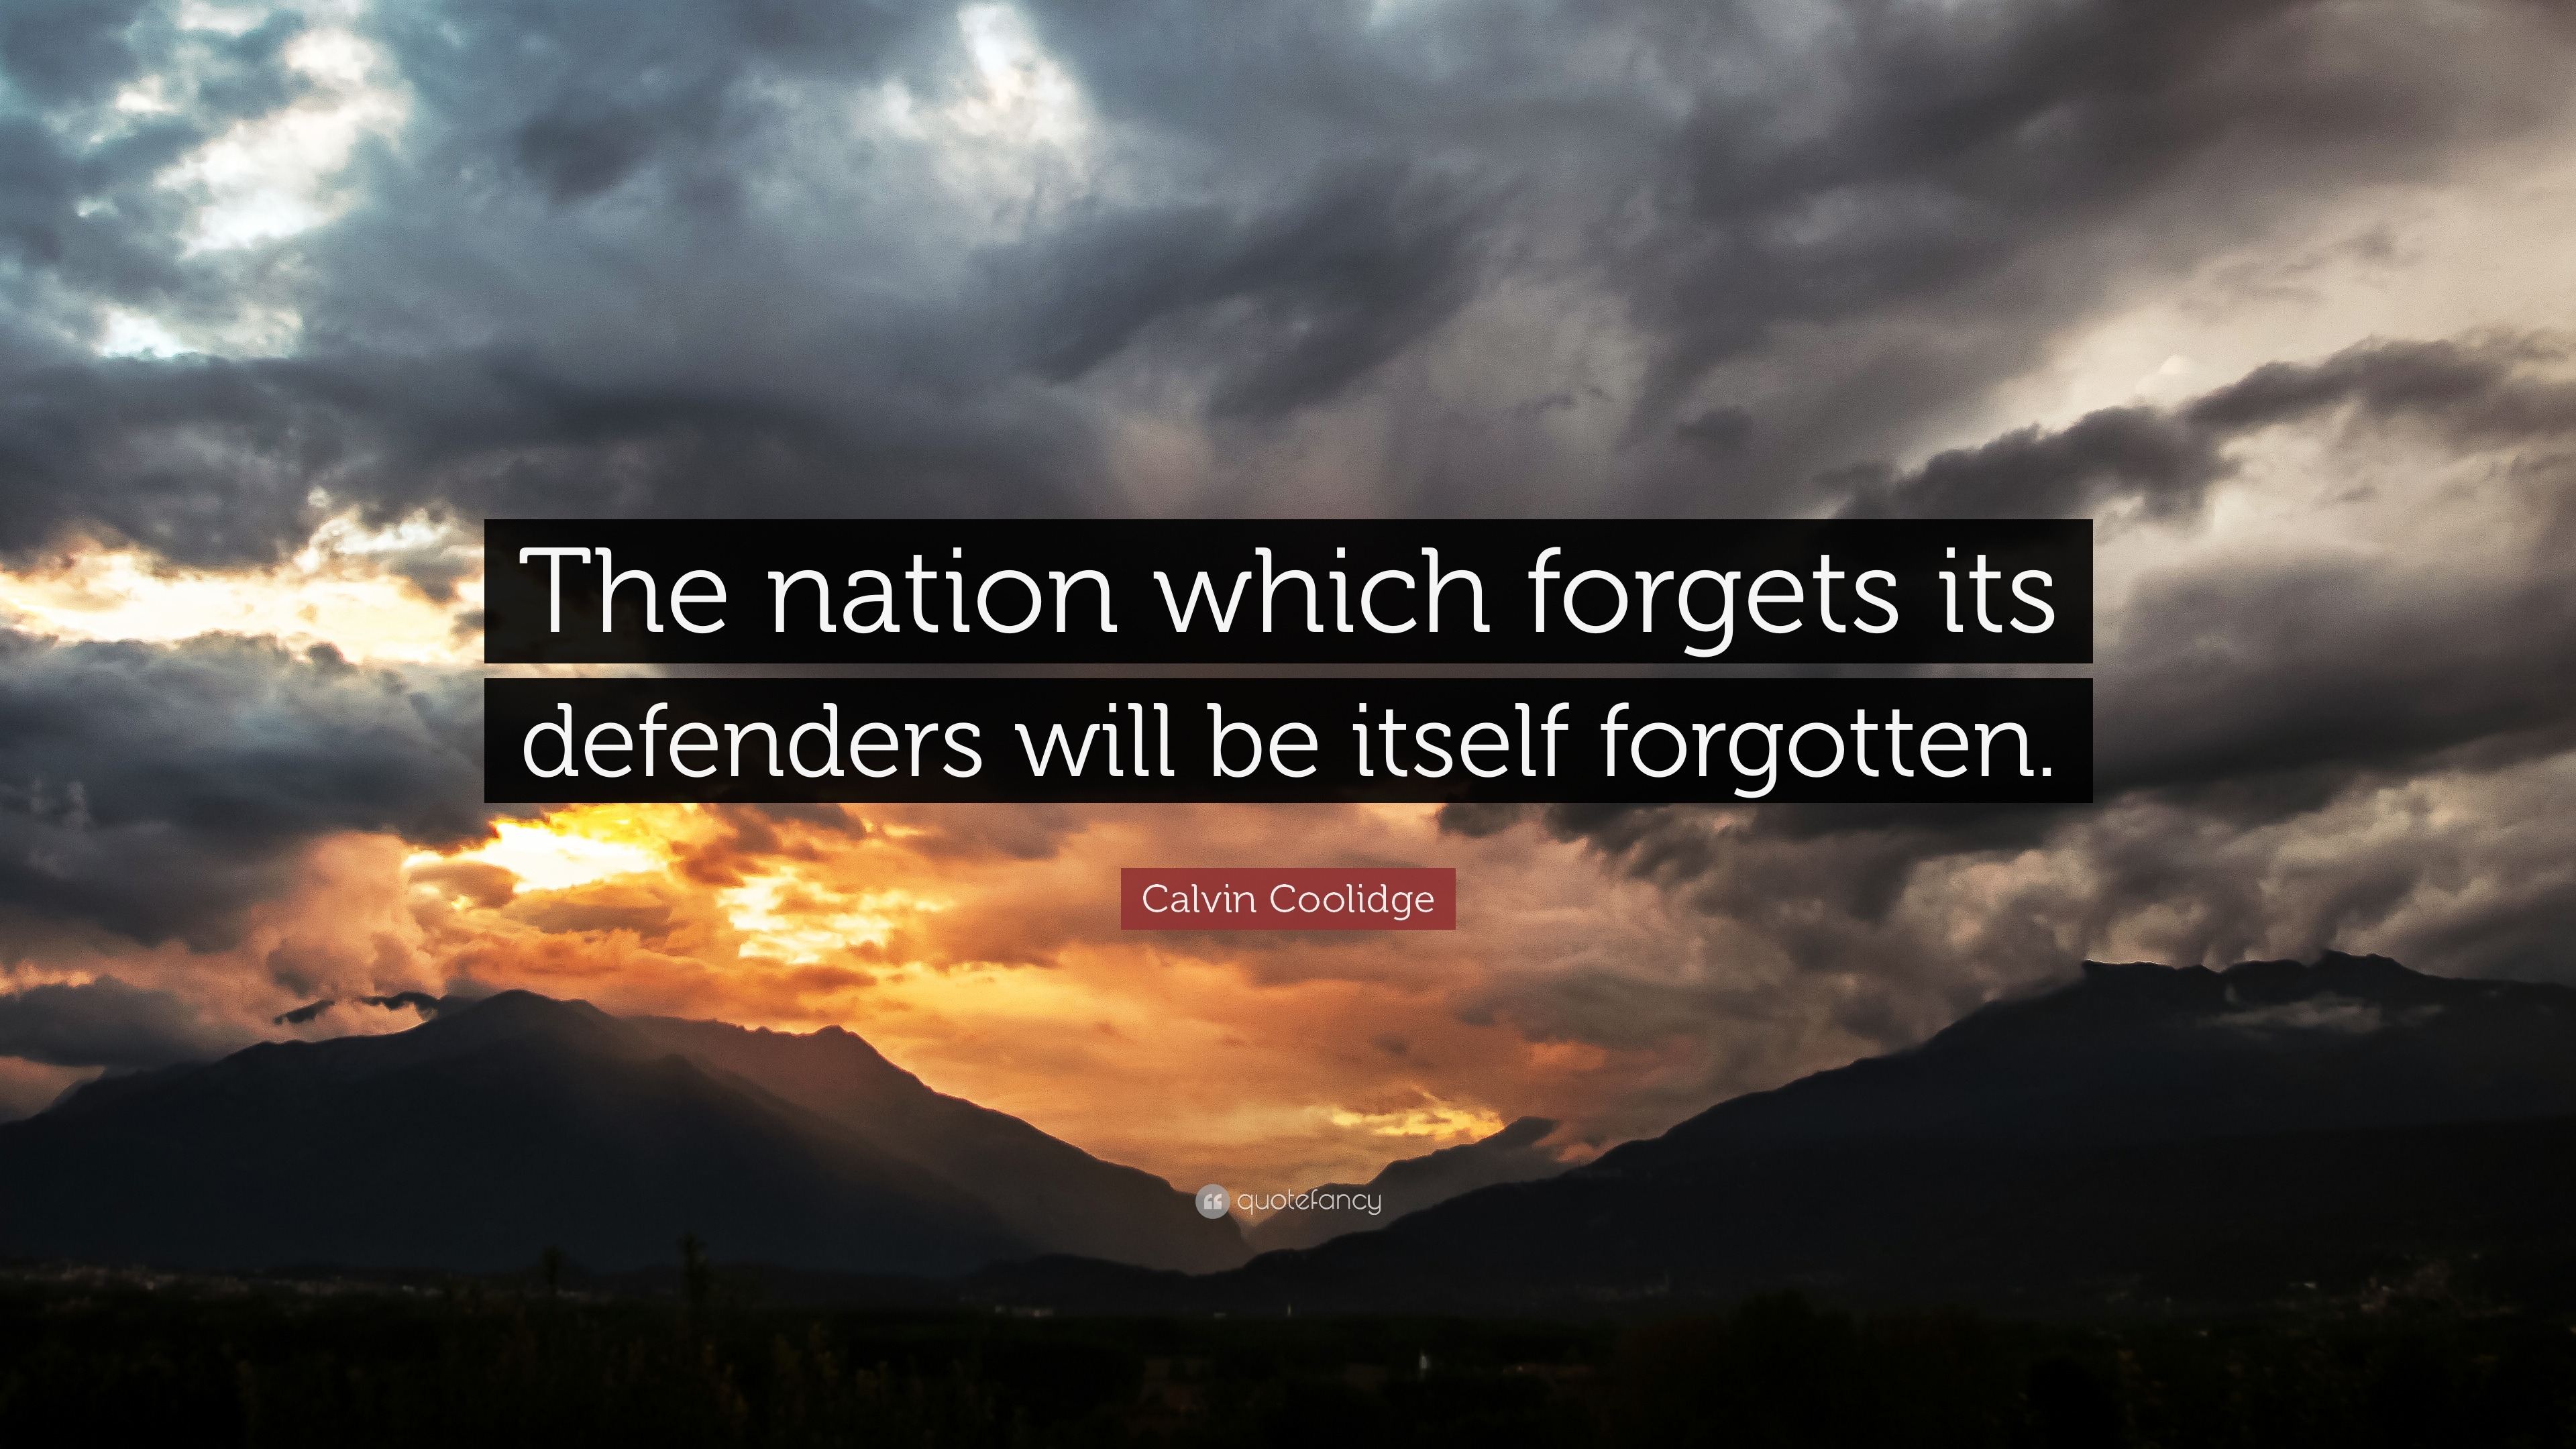 Vantage - The Nation which forgets its defenders will itself be  forgotten. President Calvin Coolidge  #veteransday  #veteranweek #honor #usa #military #service #sacrifice #veterans  #usmilitary #armedforces #soldiers #thankyou